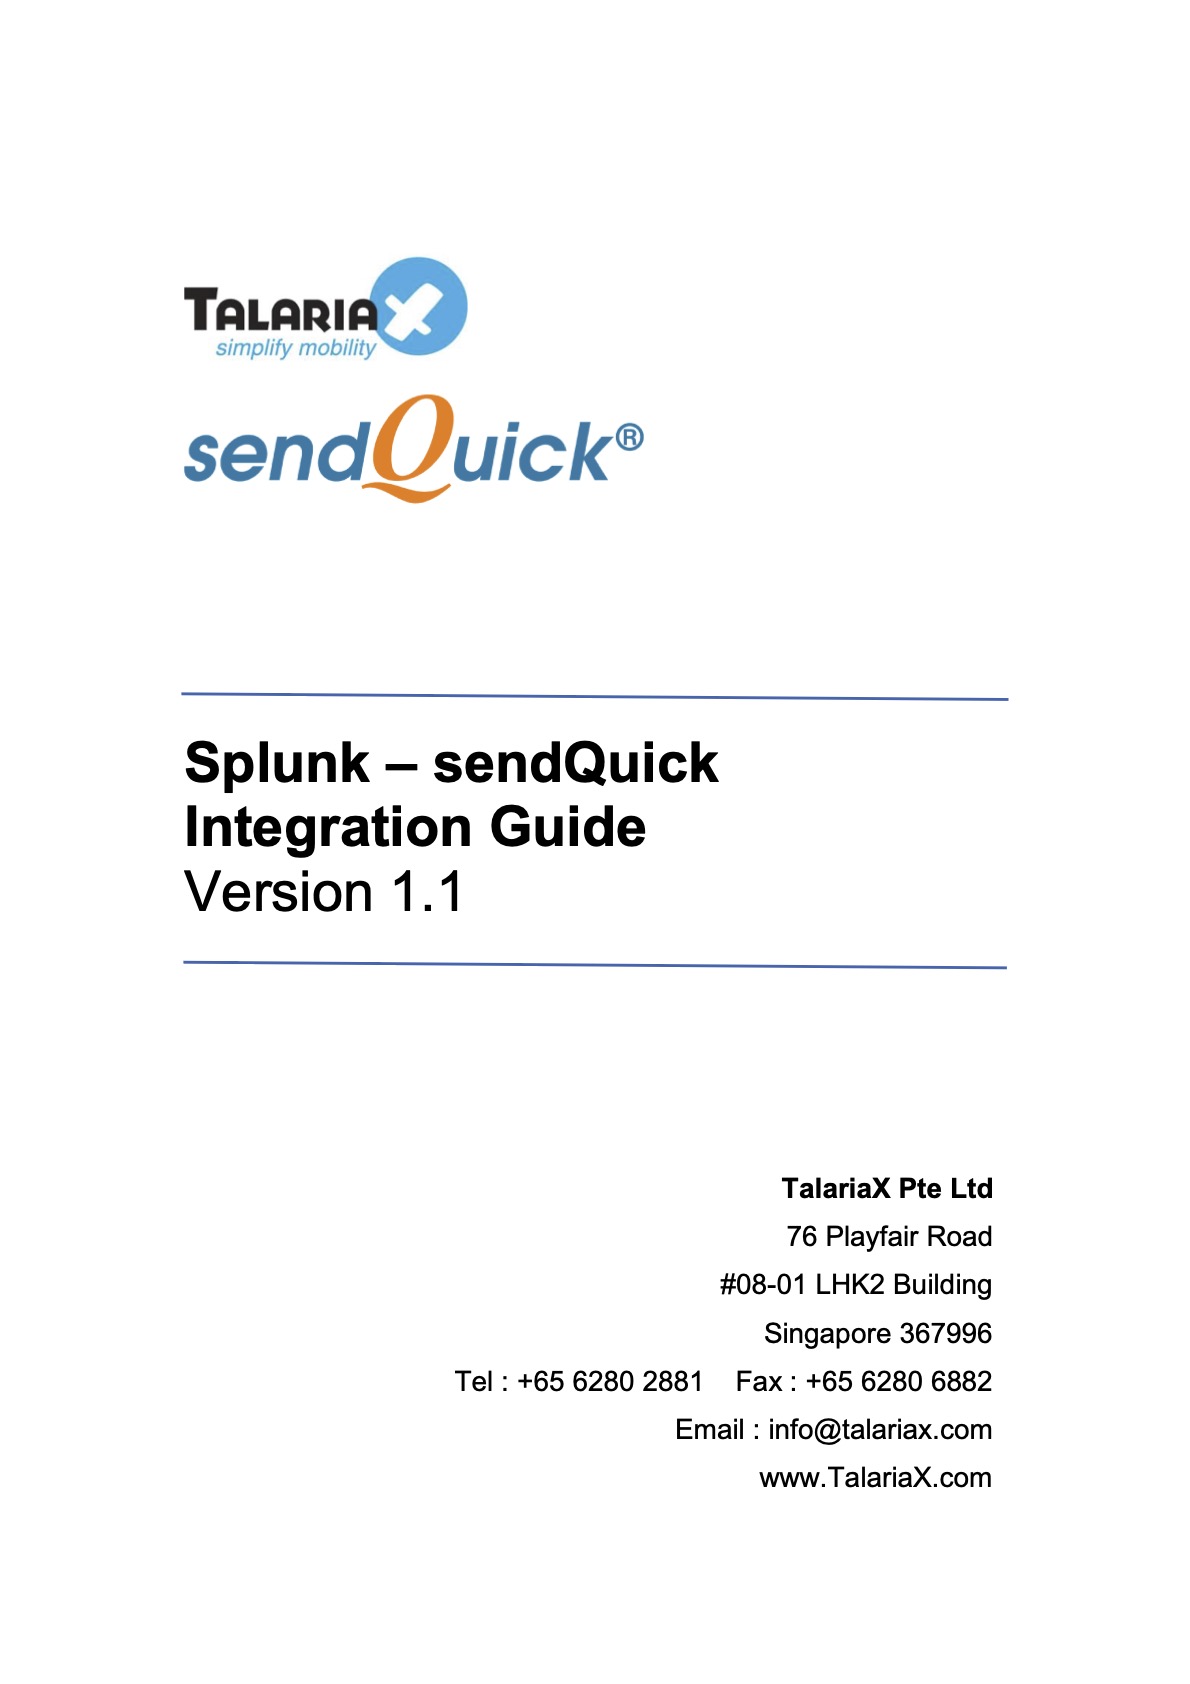 You are currently viewing Splunk and sendQuick Integration Guide V1.1